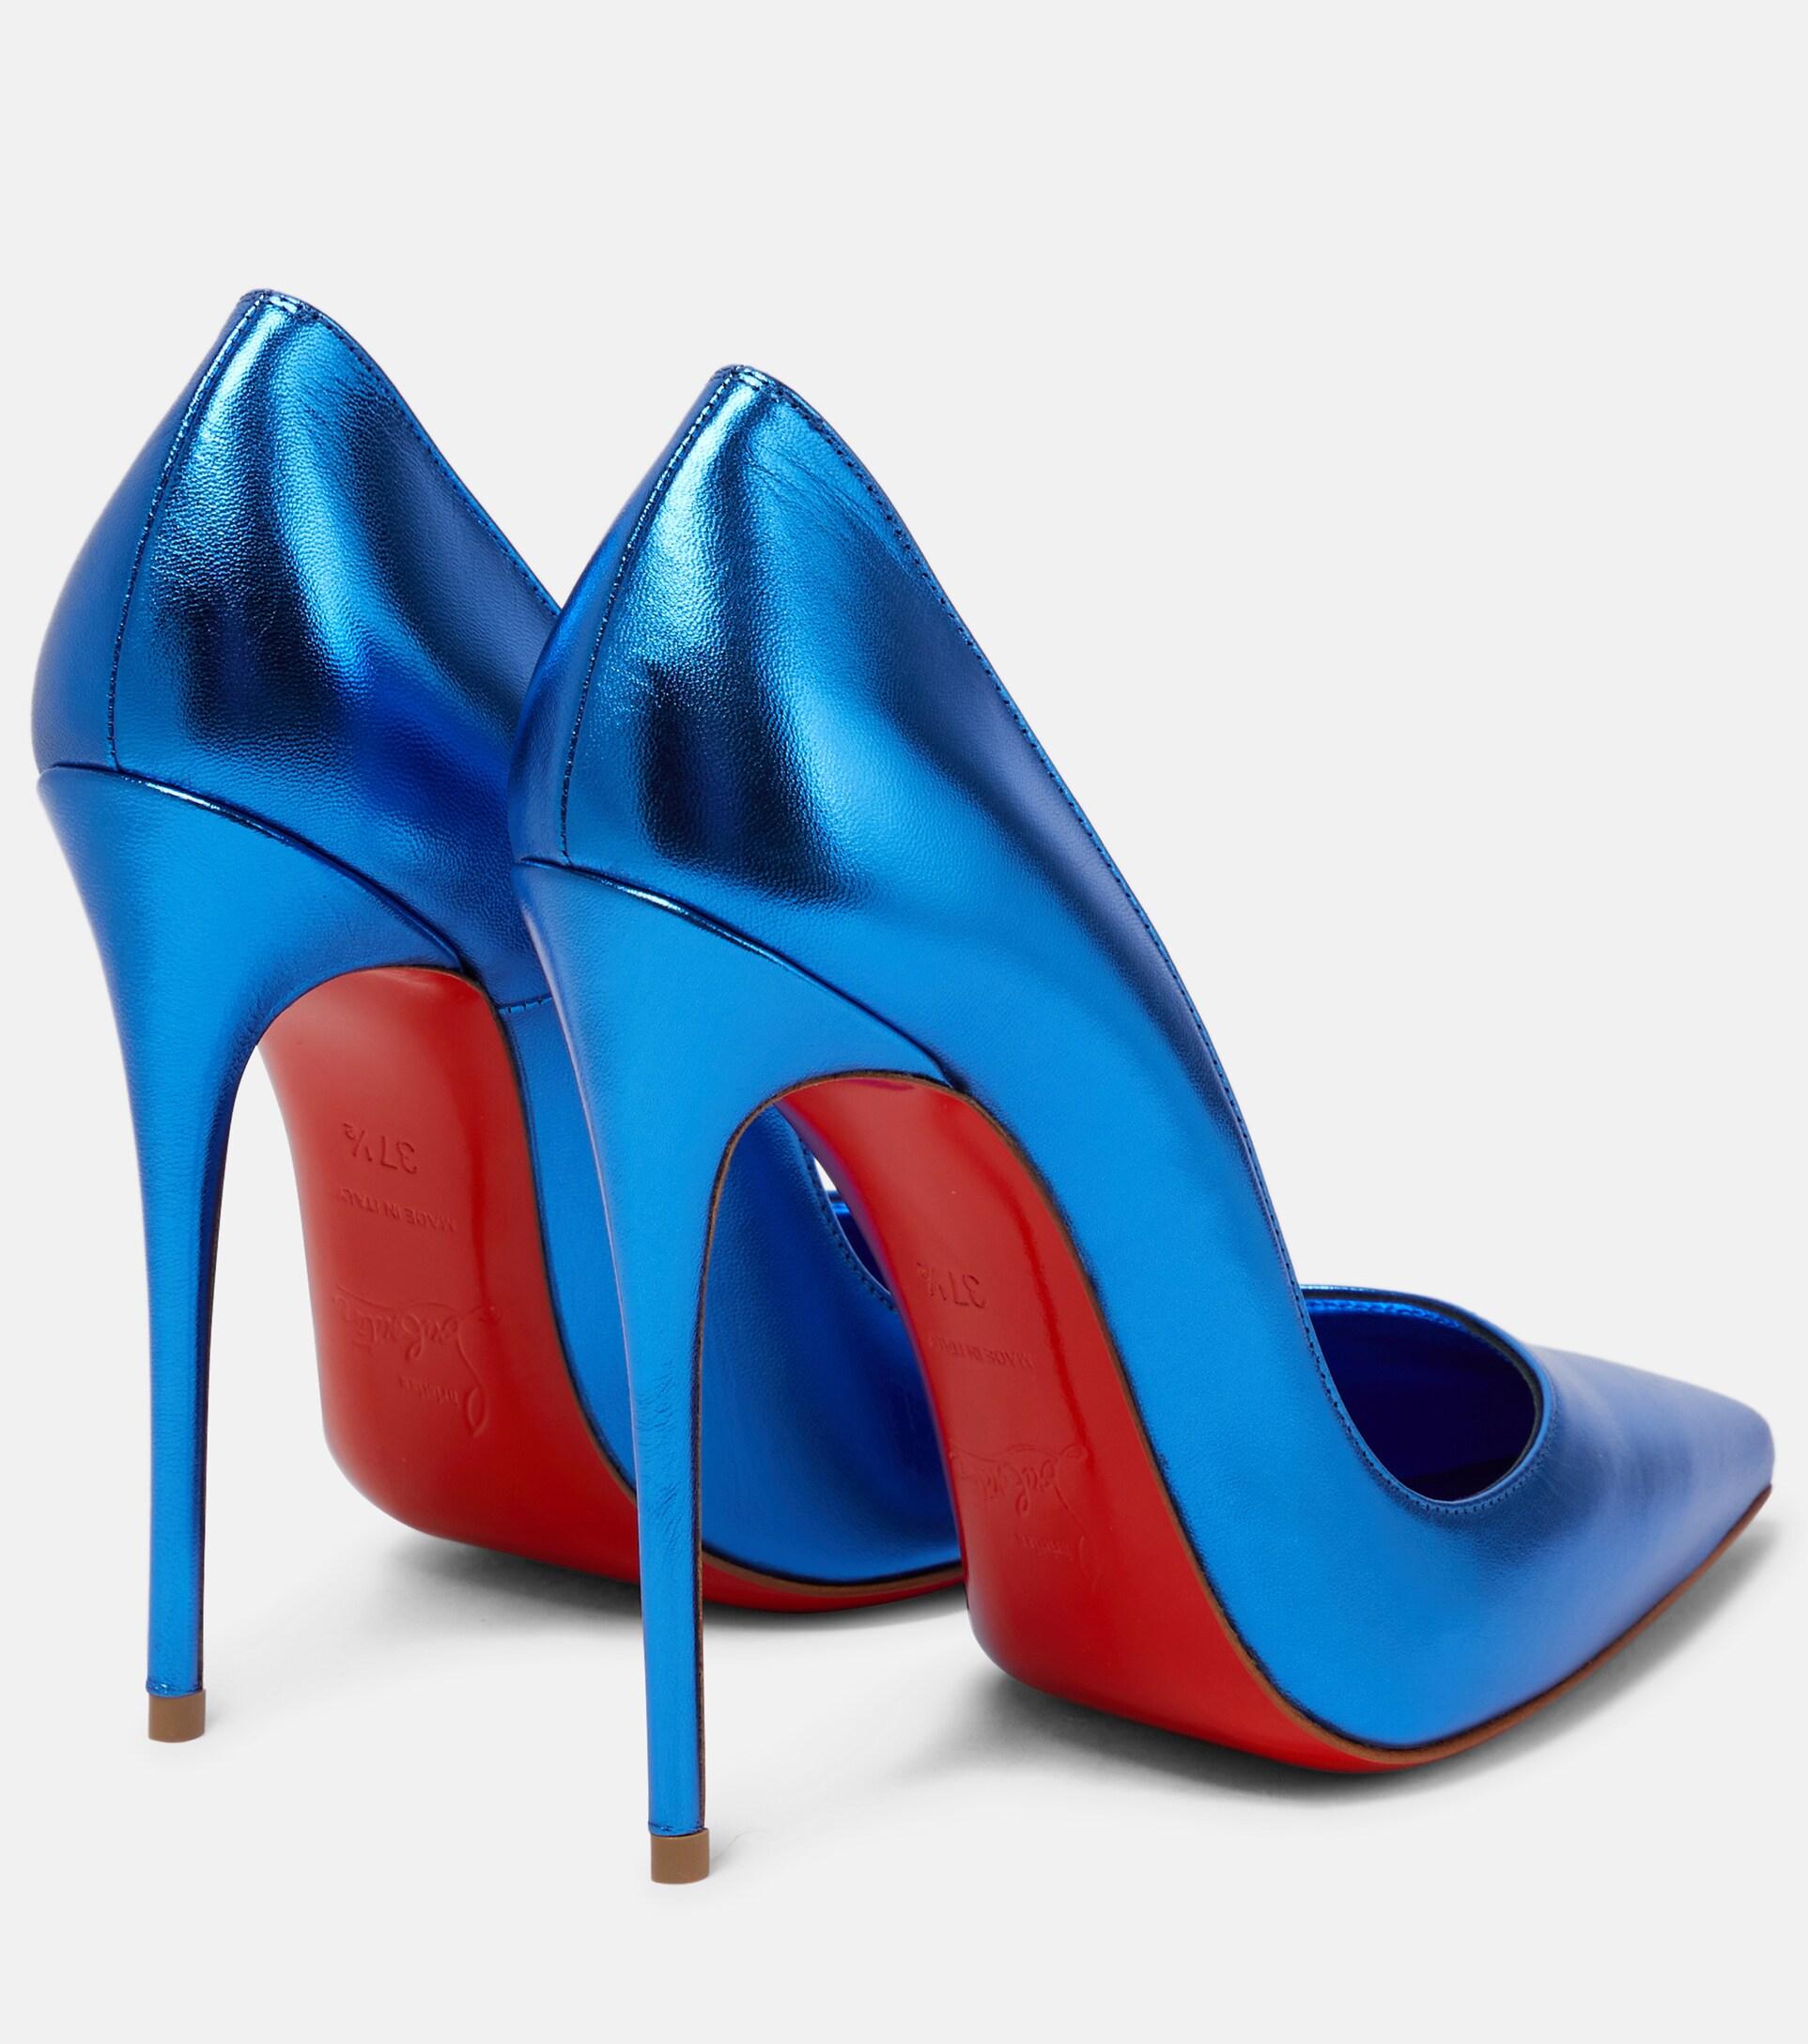 Christian Louboutin So Kate 120 Metallic Leather Pumps in Blue |